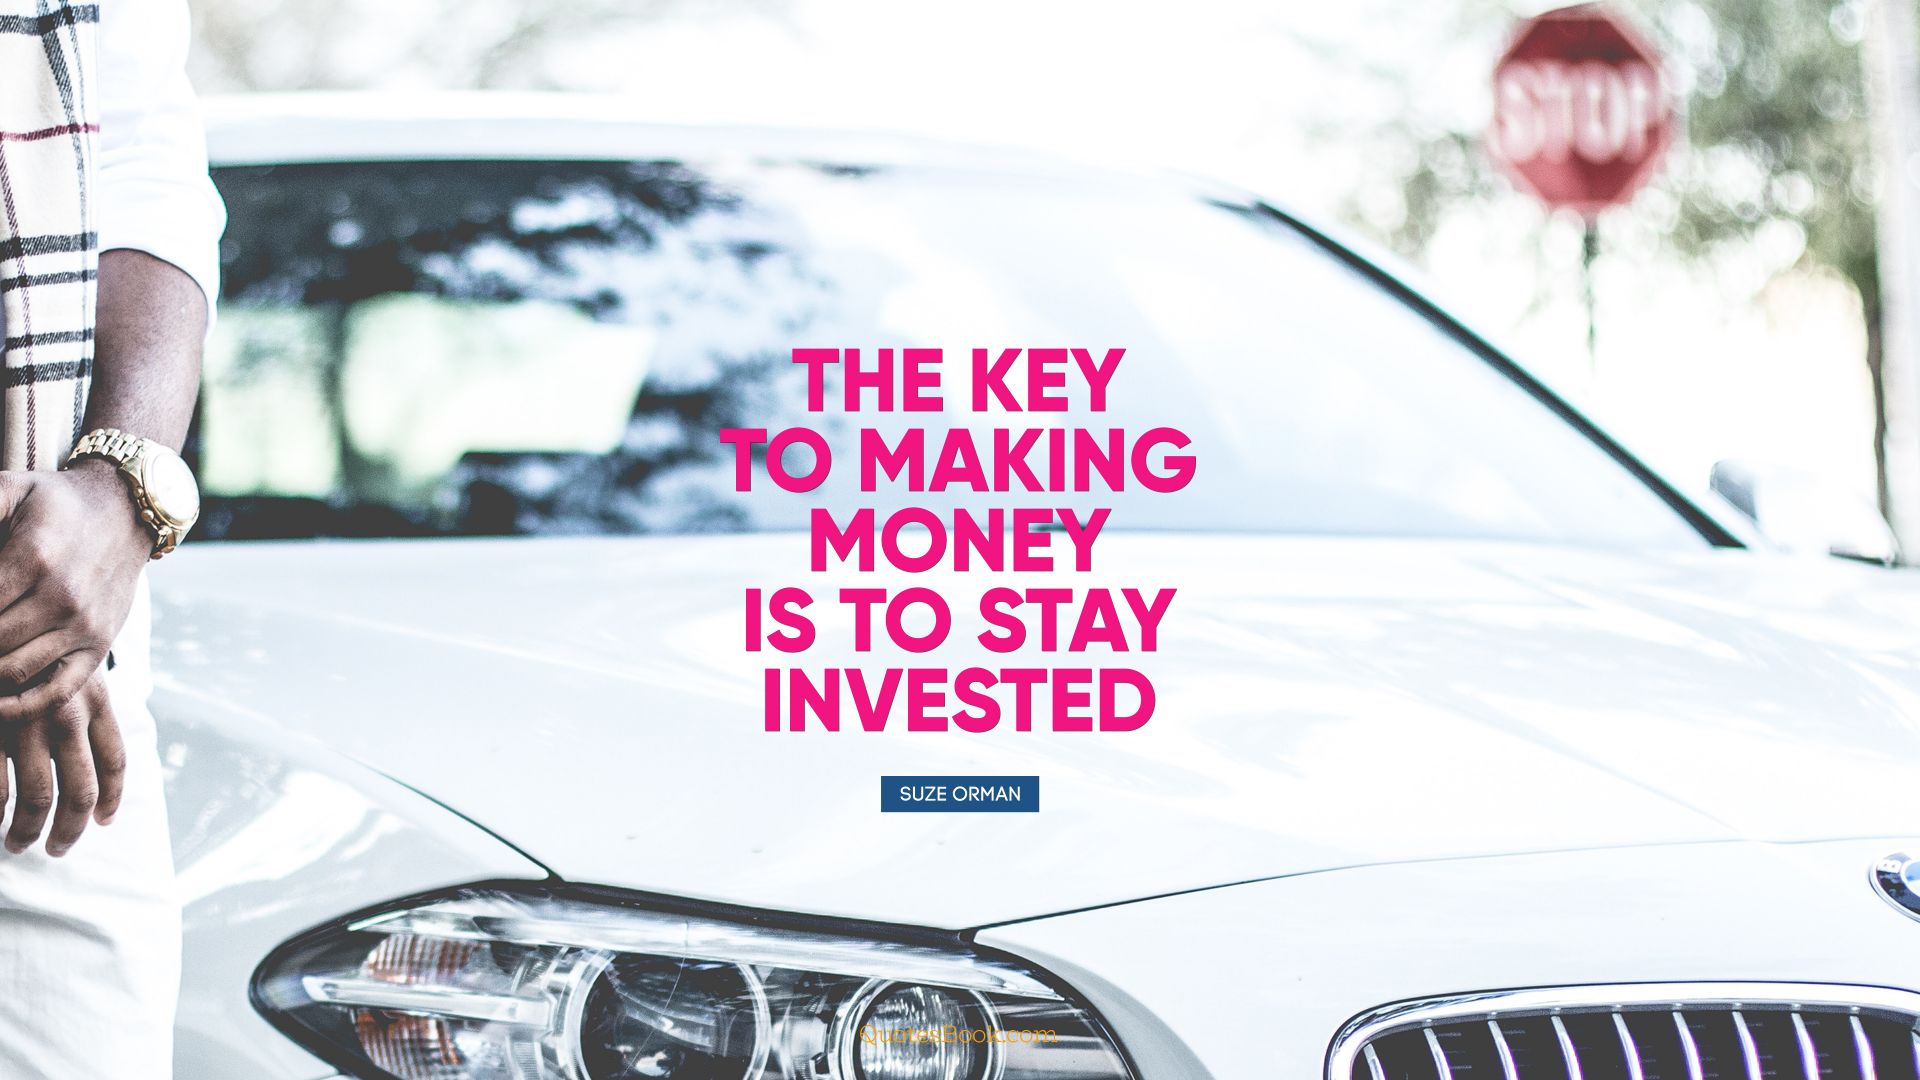 The key to making money is to stay 
invested. - Quote by Suze Orman